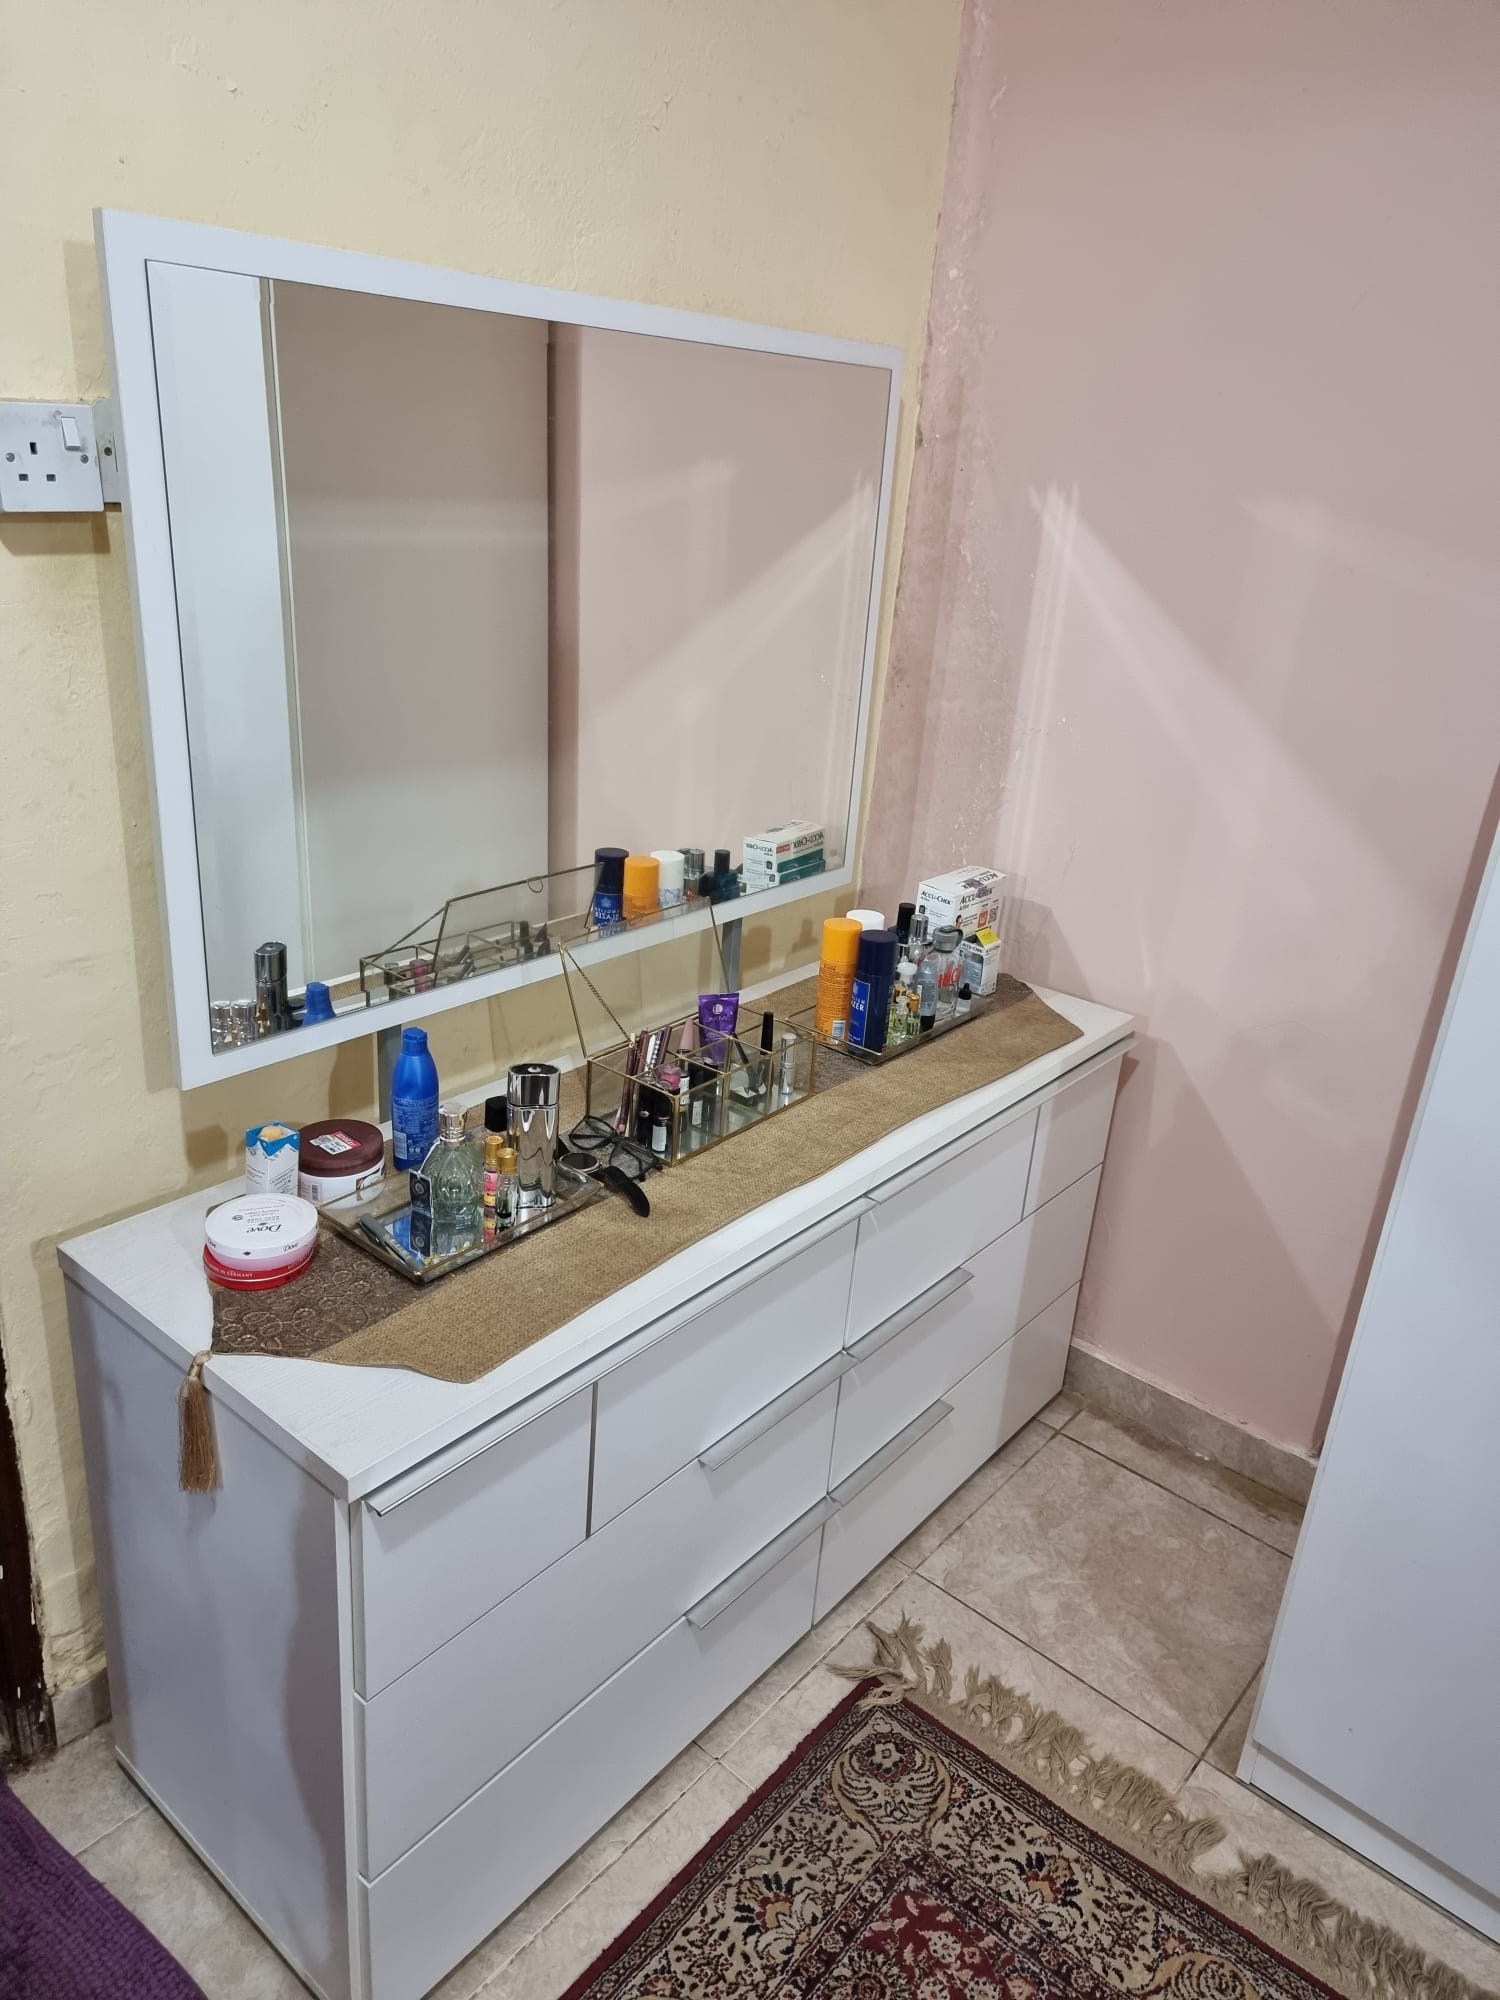 Flat available with household items and home appliance